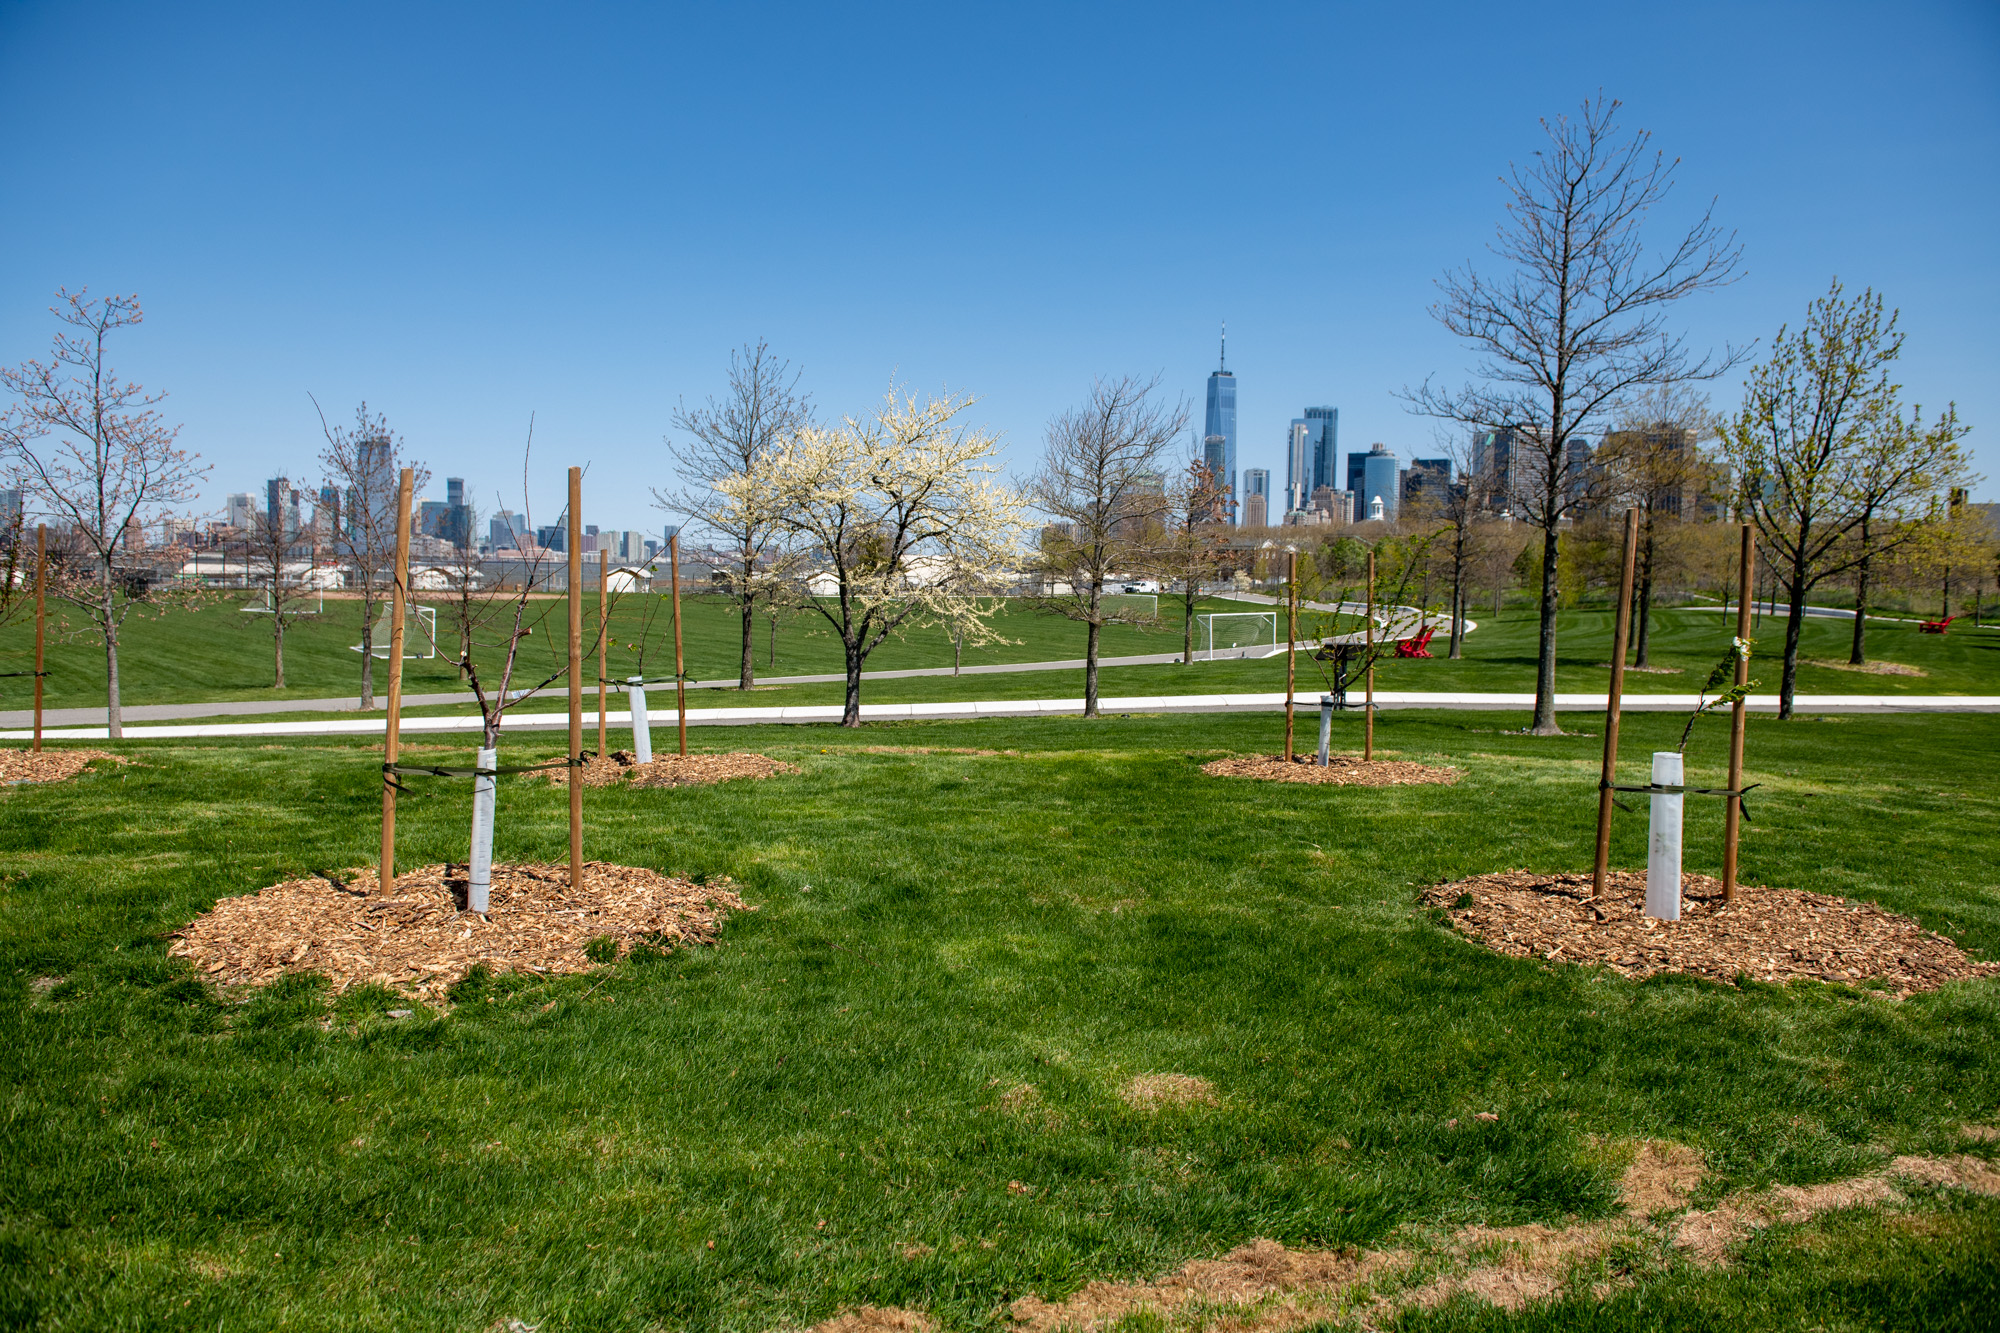 Newly planted trees held up by wooden poles in a lawn of green grass with the New York City skyline behind it.